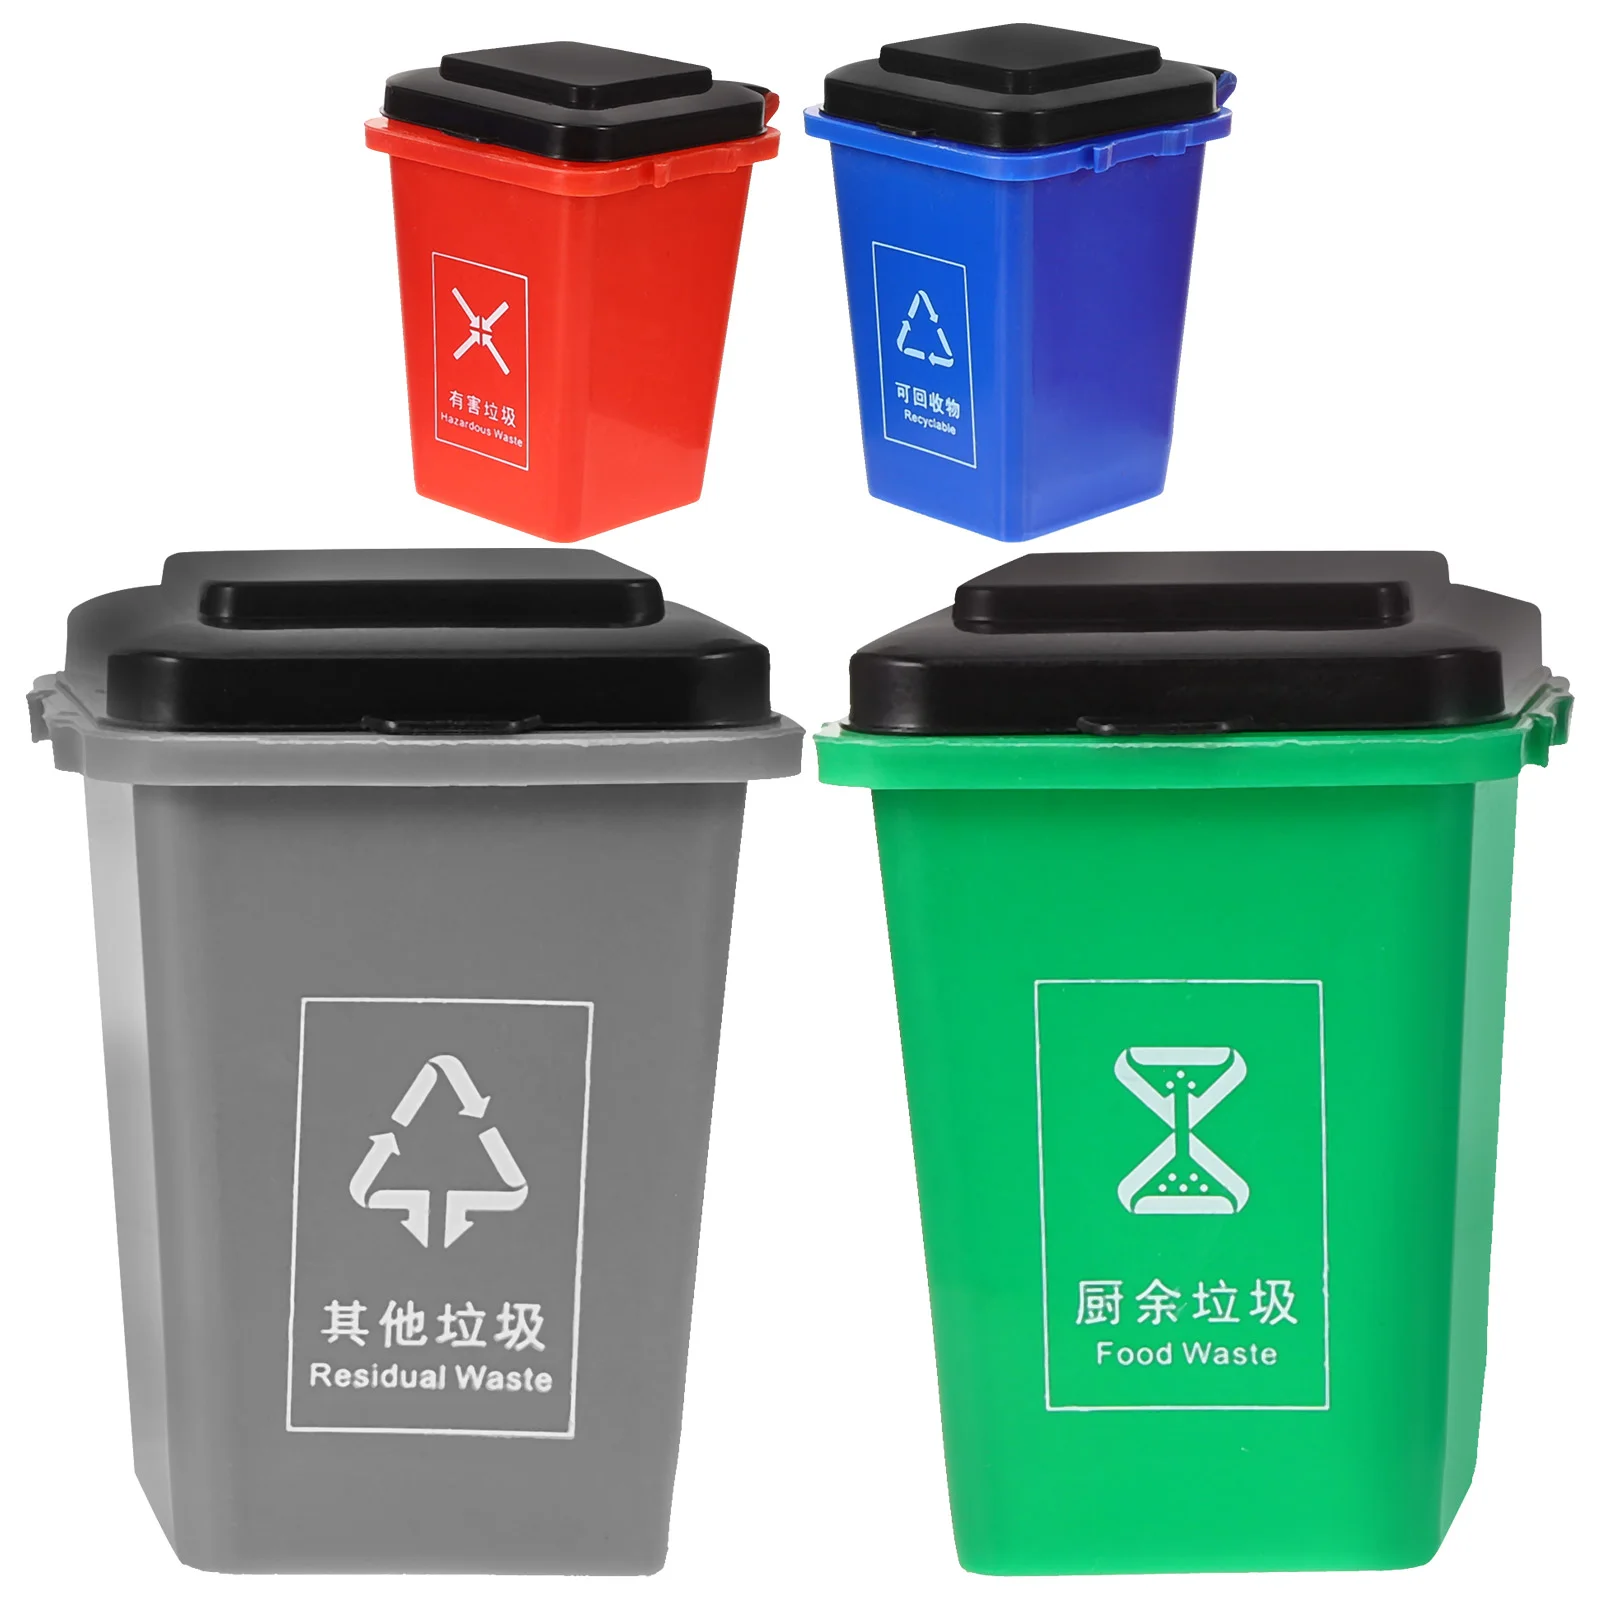 

Early Educational Toy Kids Trash Cans Garbage Classification Game Mini Sorting Cognitive